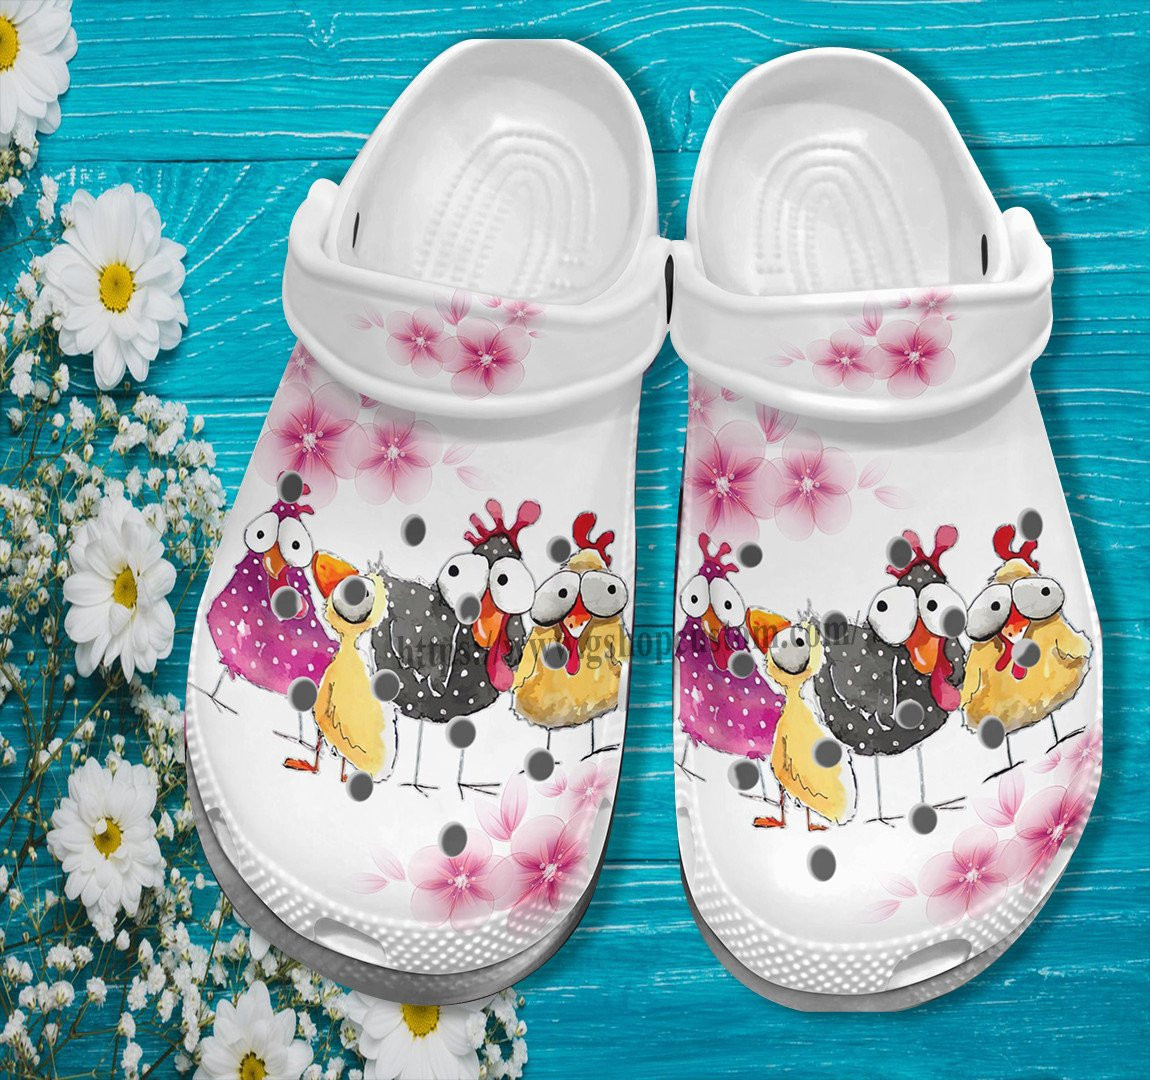 Chicken Funny Cherry Flower Crocs Shoes Gift Women Mother Day- Chicken Farm Girl Cute Shoes Croc Clogs